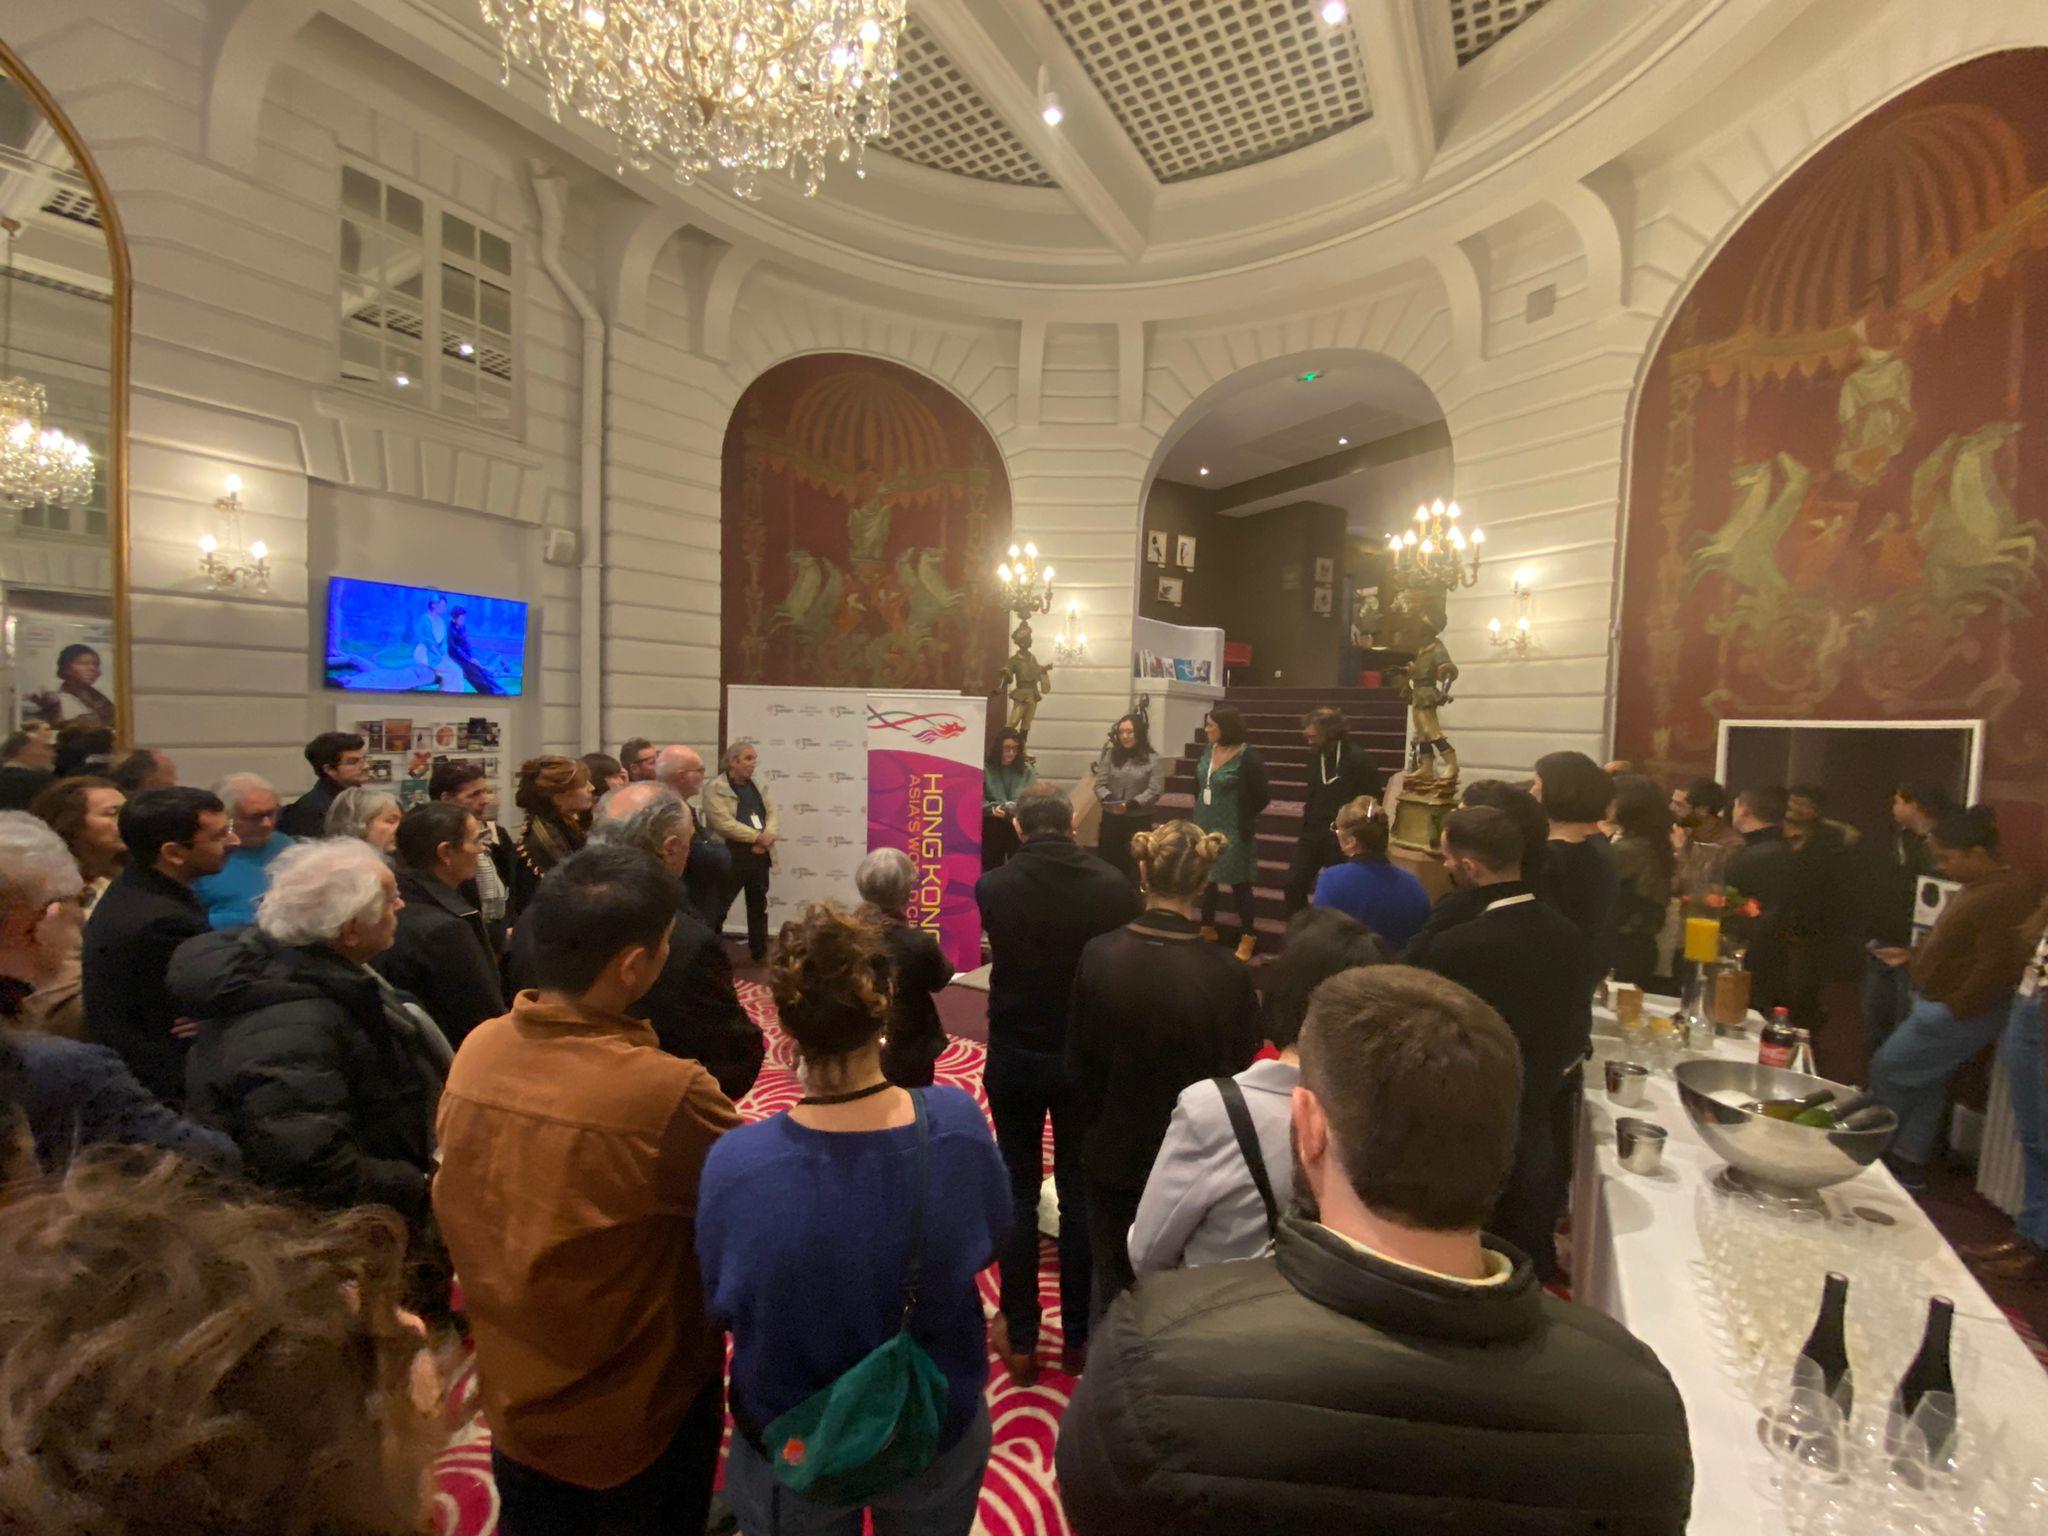 The Deputy Representative of the Hong Kong Economic and Trade Office in Brussels, Miss Grace Li, spoke to guests of a reception organised at the Festival des 3 Continents on November 30 (Nantes time).